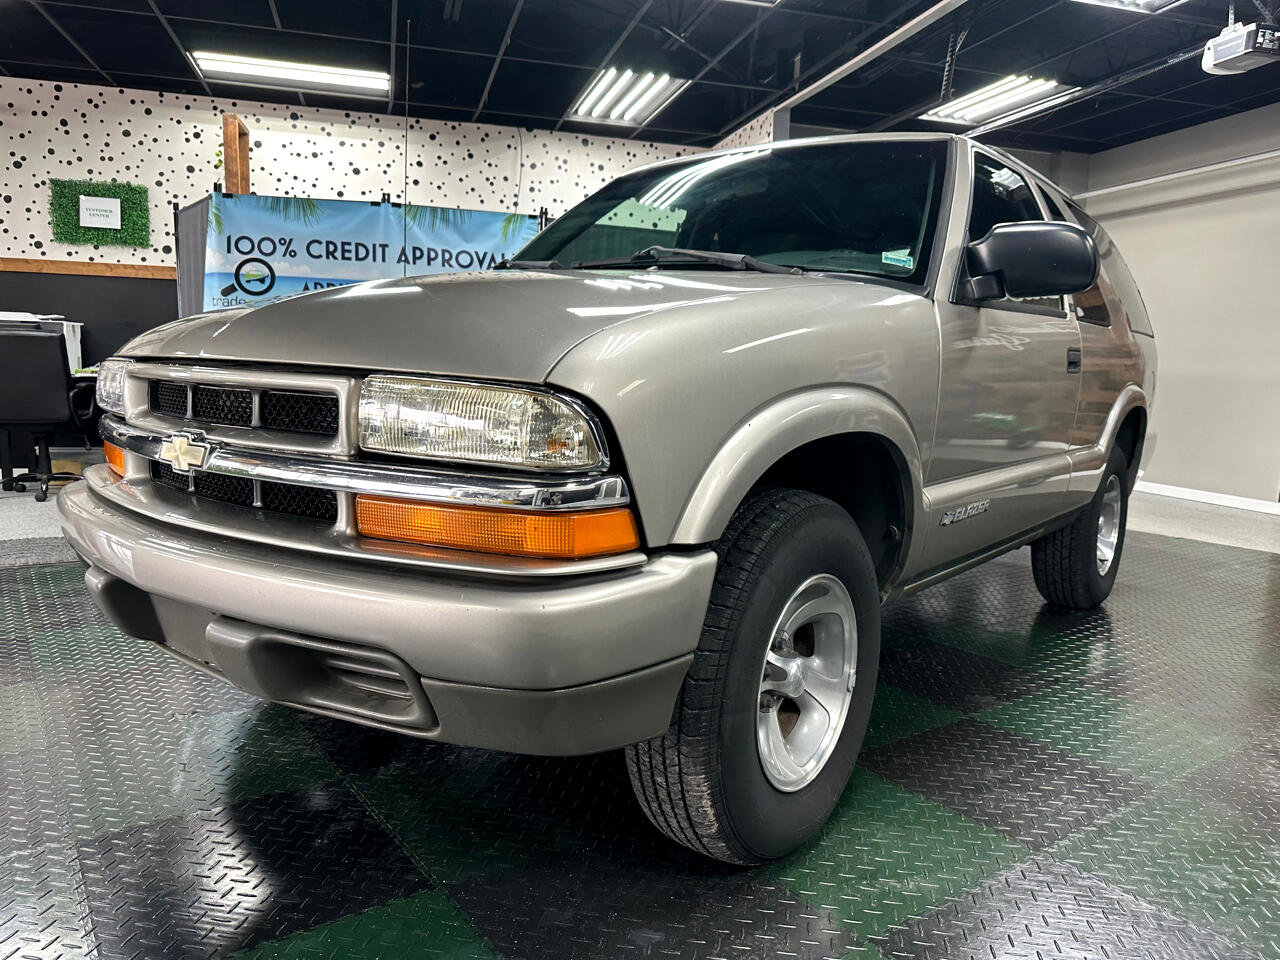 Used 2002 Chevrolet Blazer for Sale Right Now - Autotrader